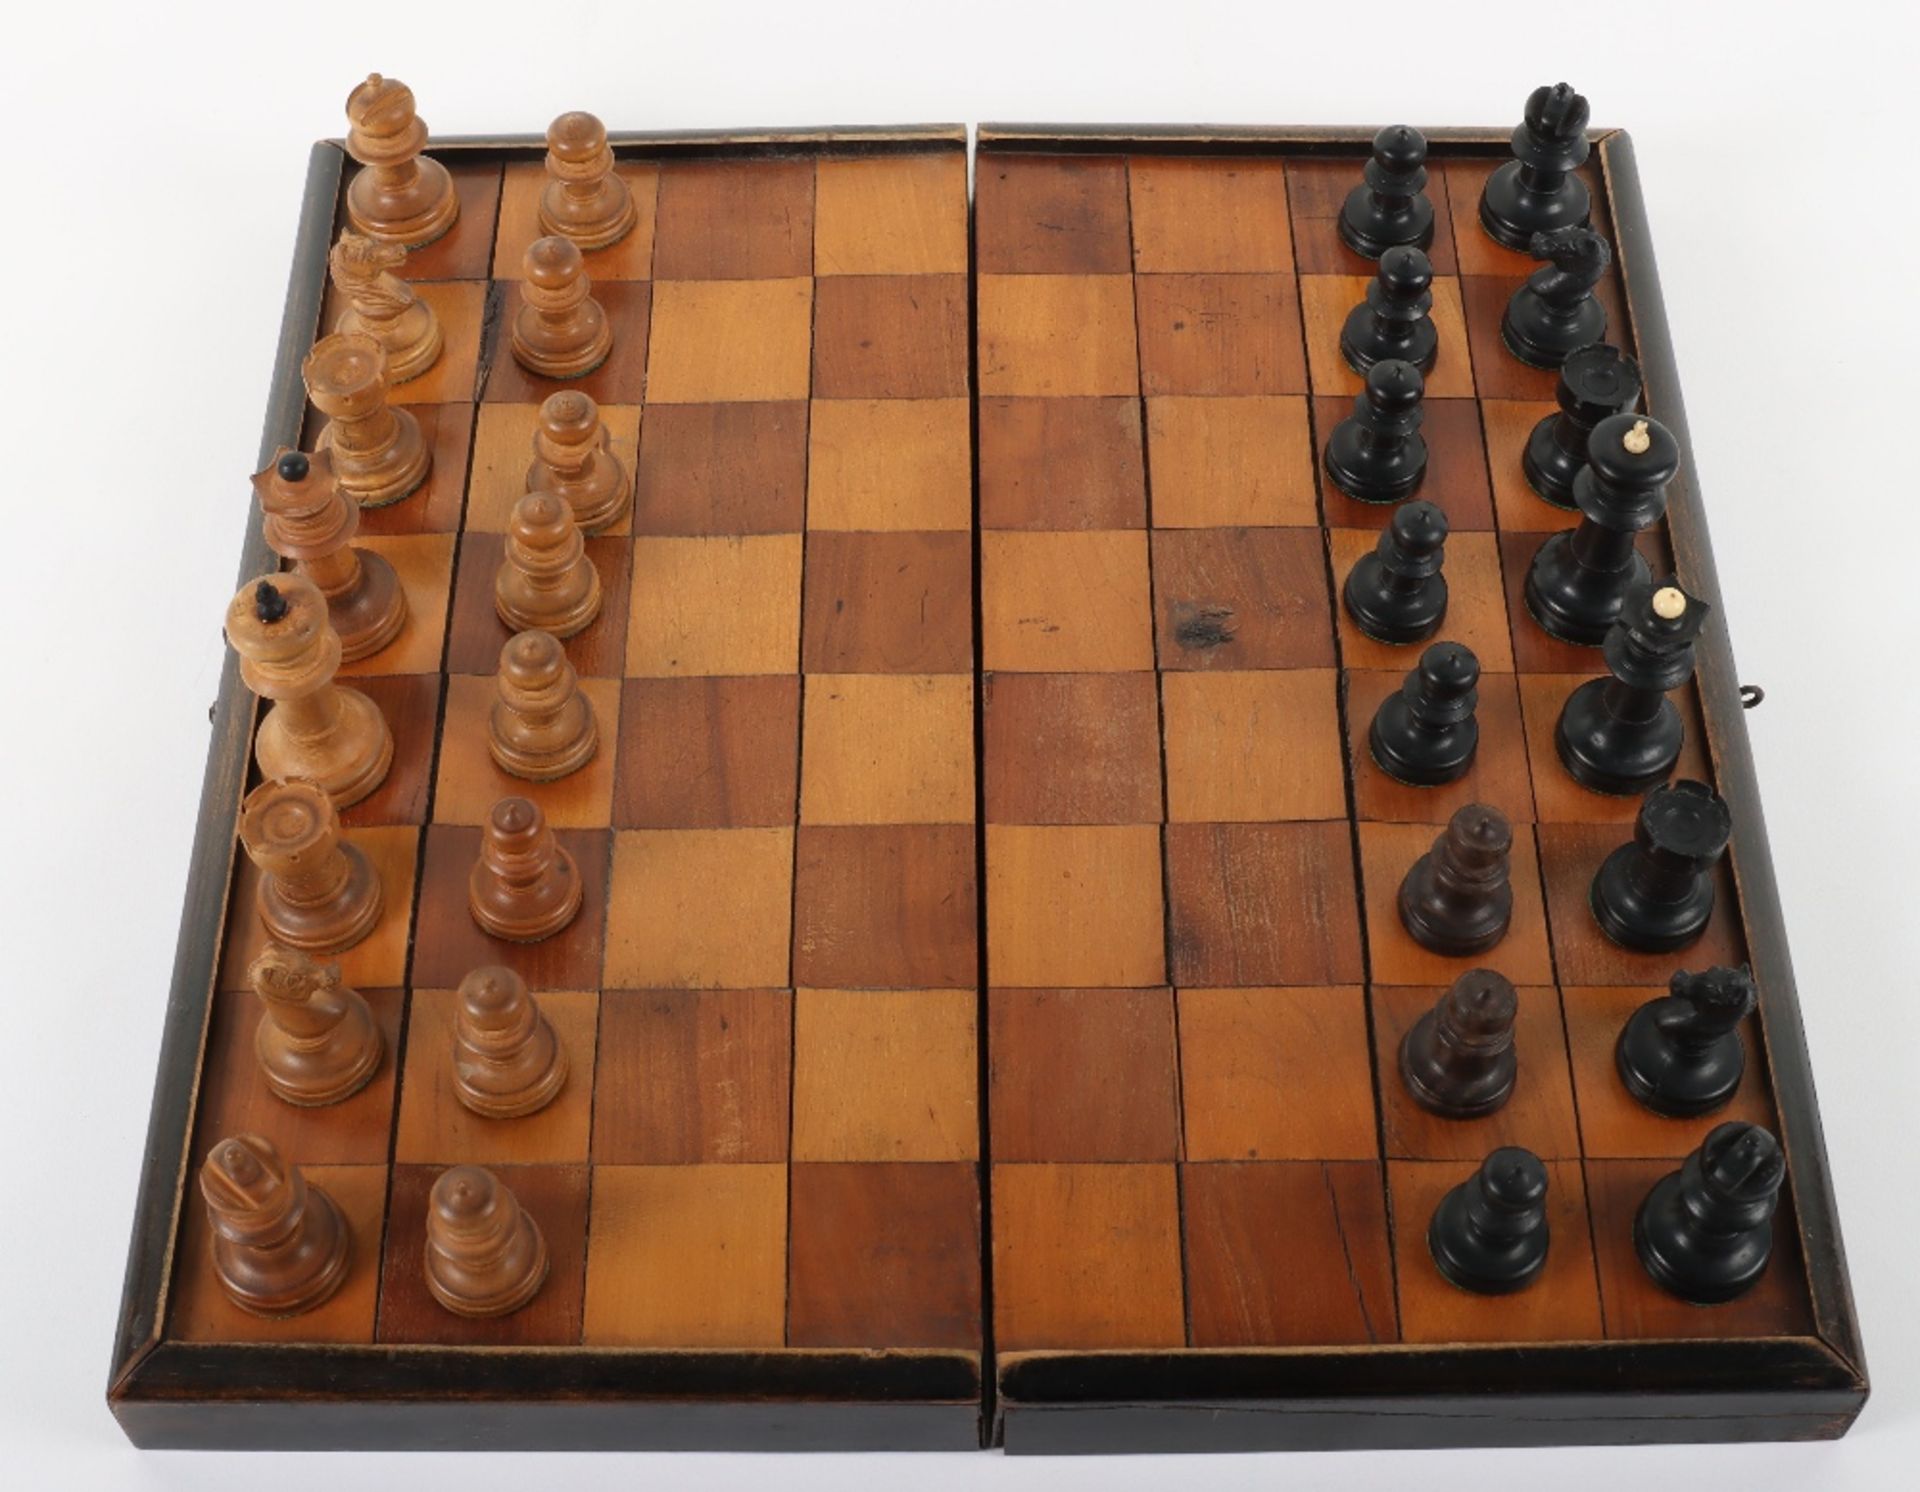 A late 19th/early 20th century chess set - Image 3 of 4